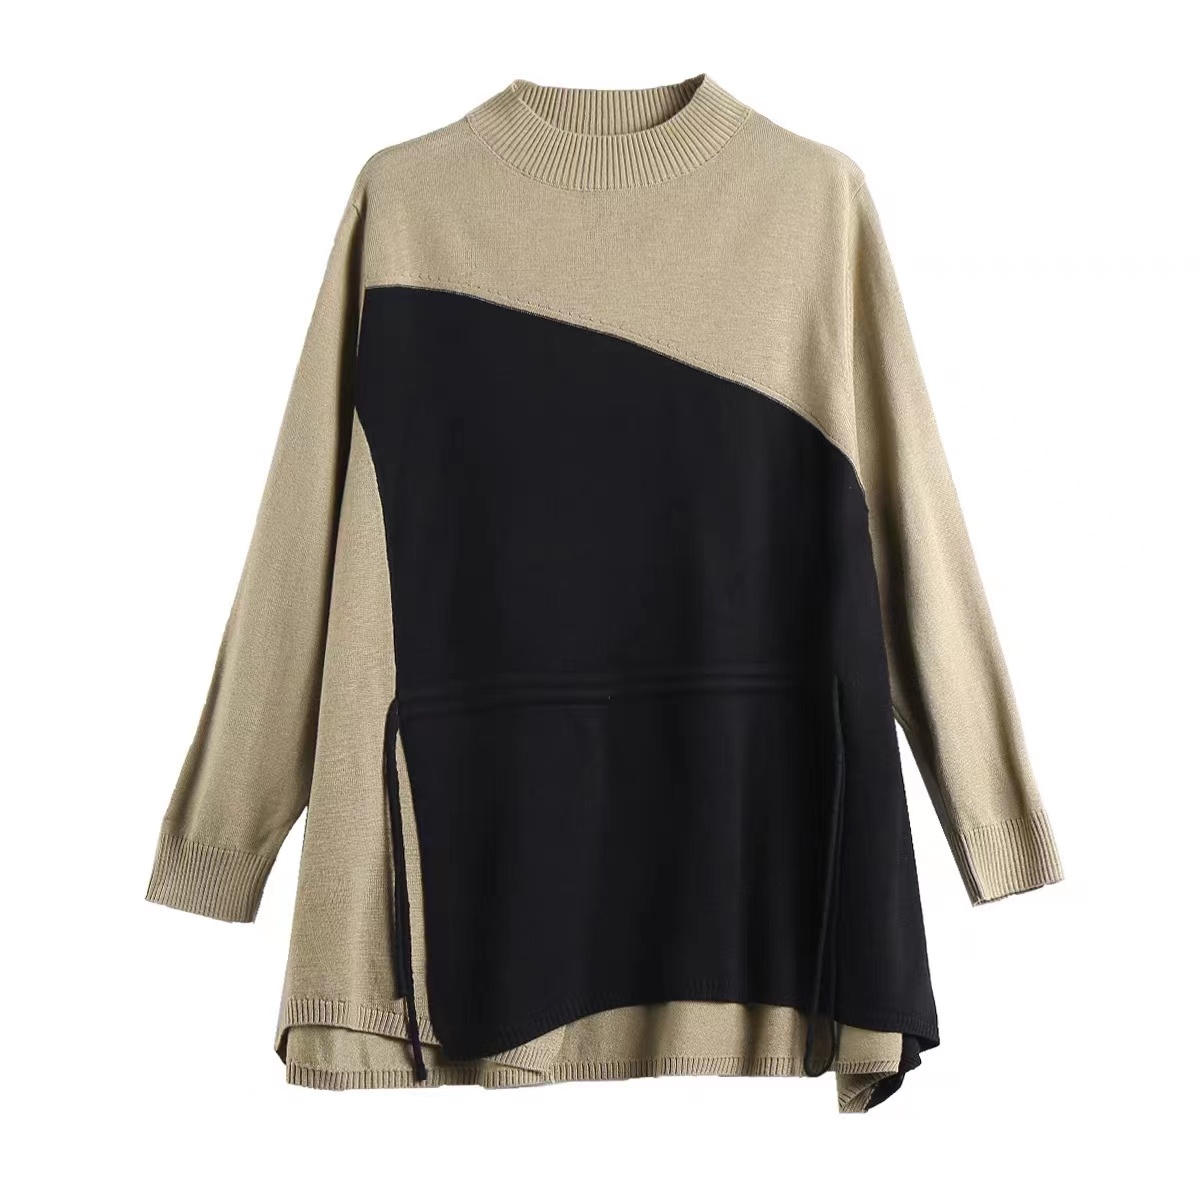 Splice autumn and winter sweater Pseudo-two tops